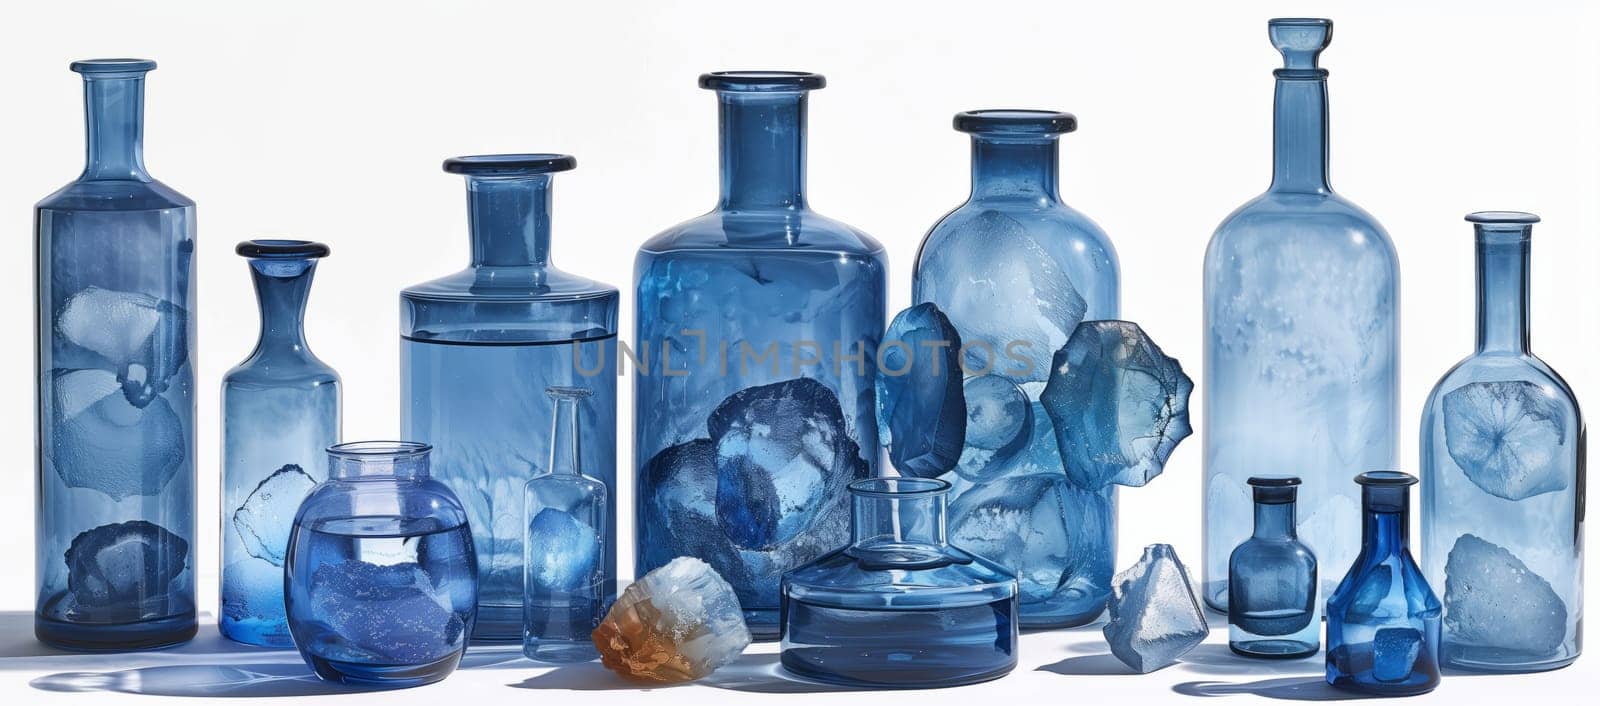 A row of electric blue glass bottles filled with various liquids are displayed on a white background. The transparent material showcases the different colors of the fluids inside